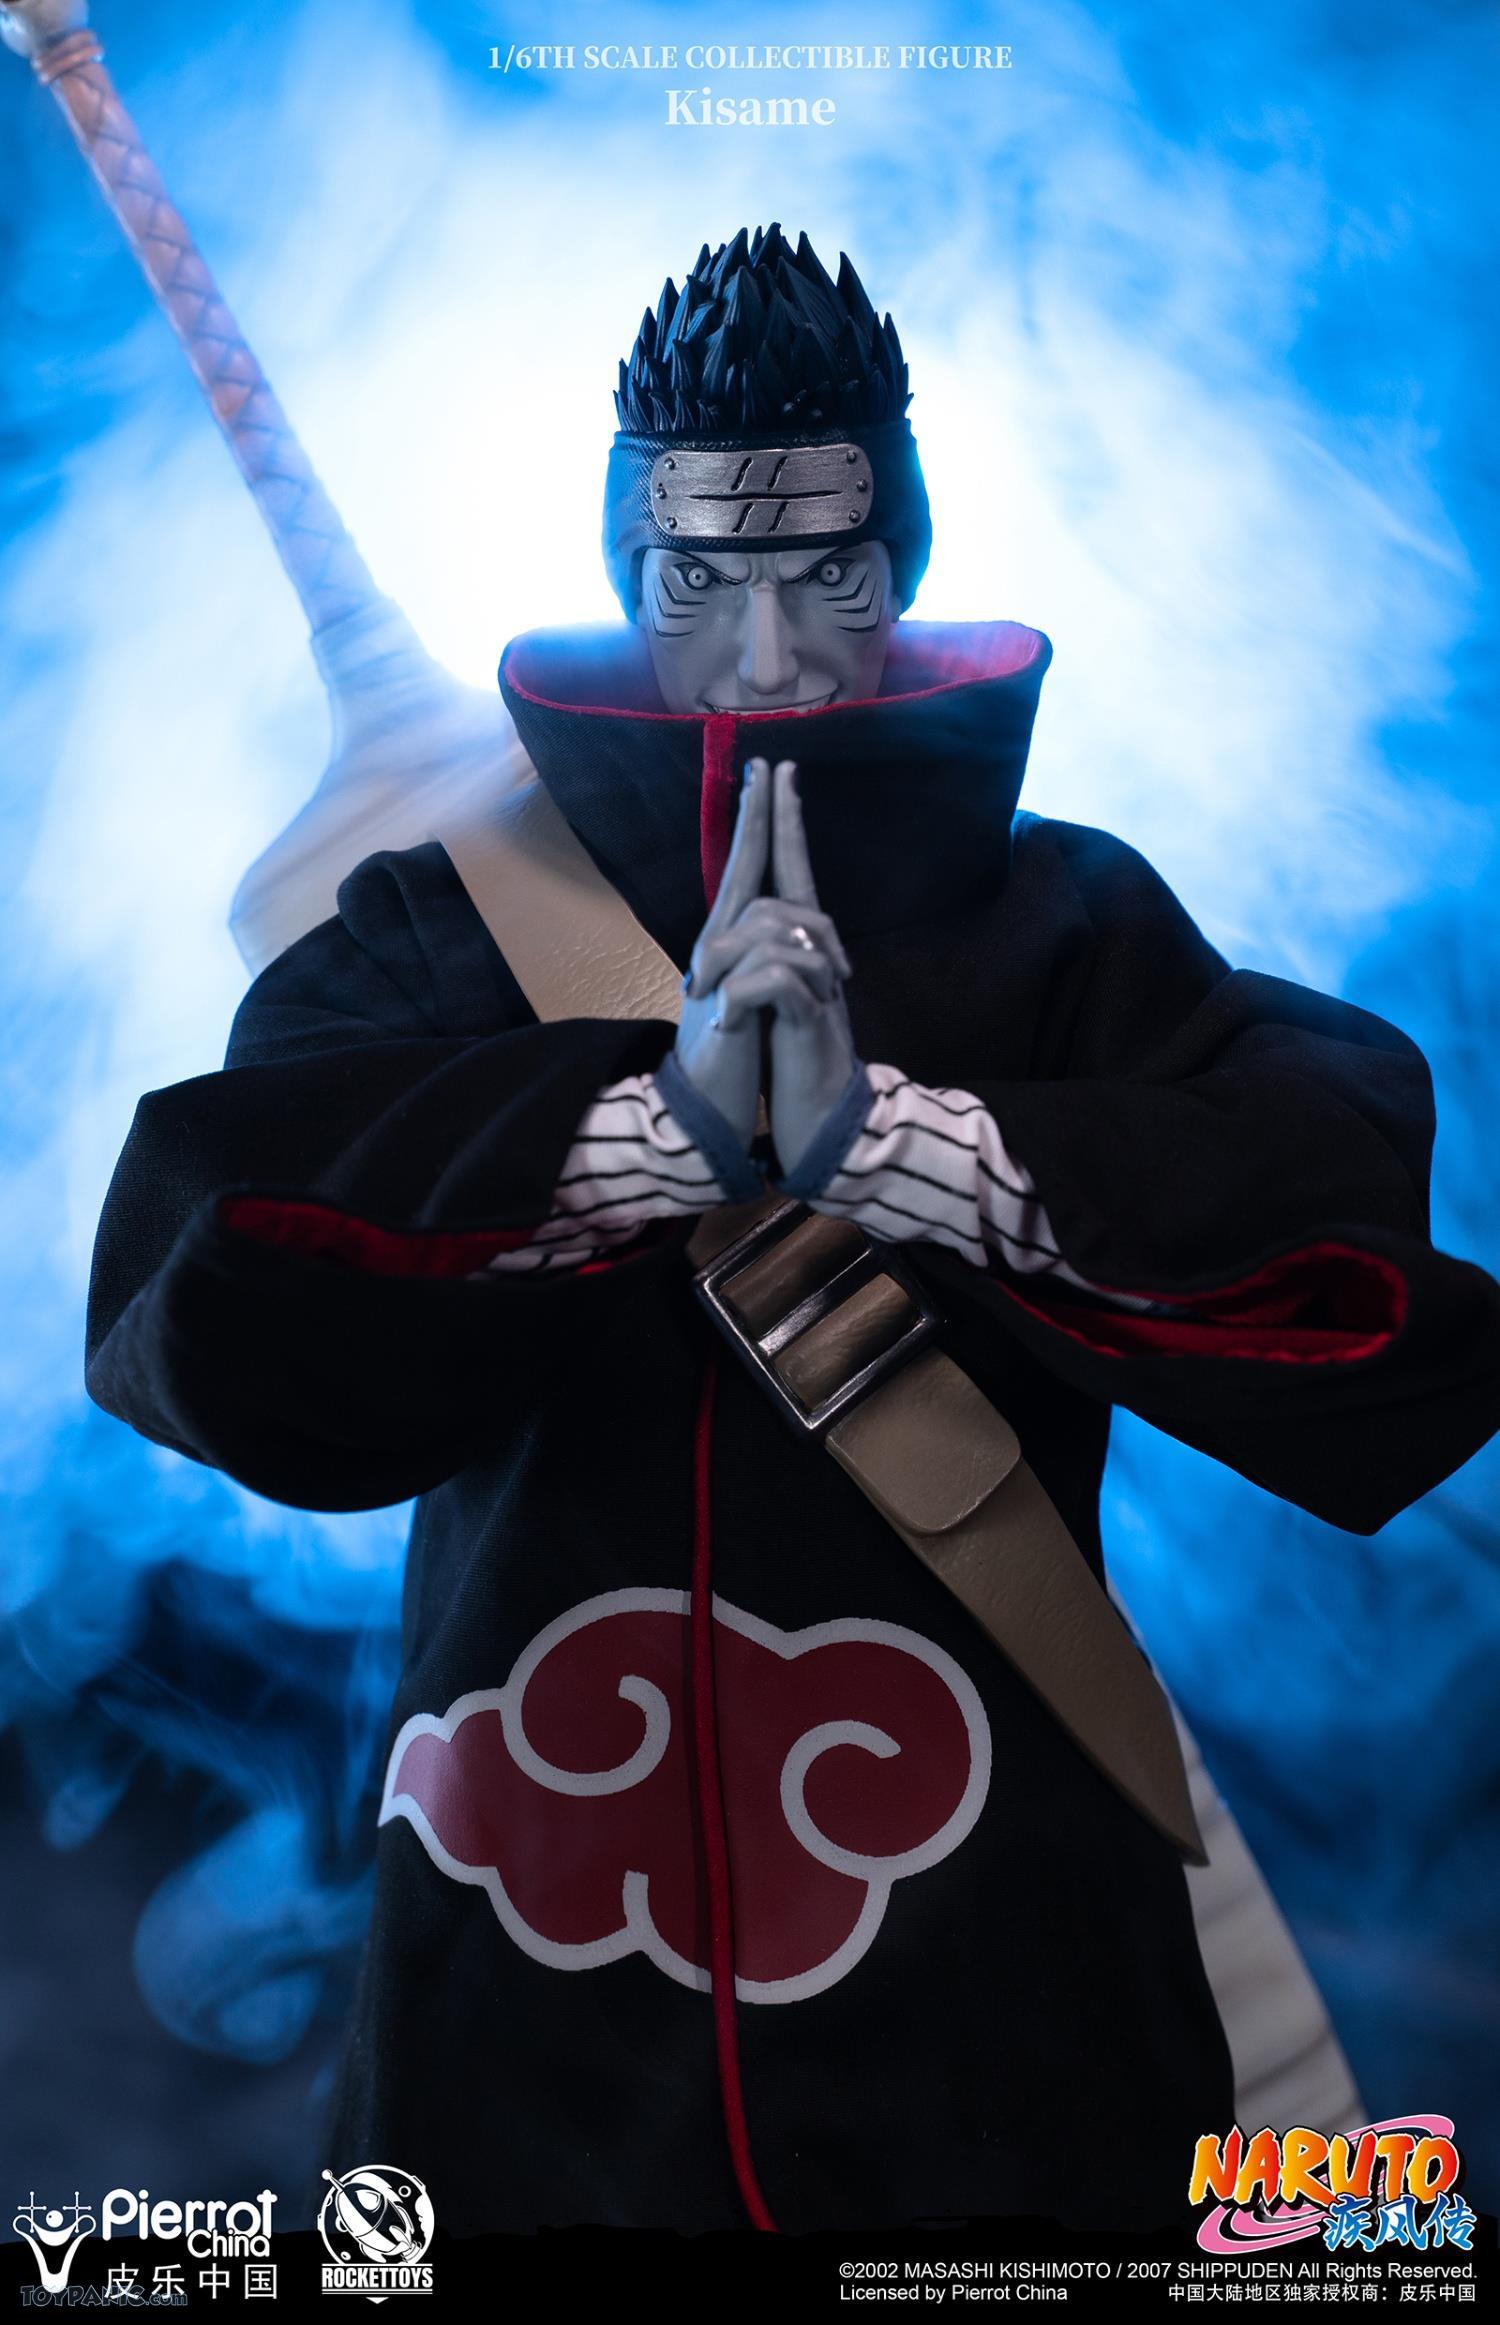 Male - NEW PRODUCT: Rocket Toys ROC-007 1/6 Scale Kisame 221202460437PM_9372204